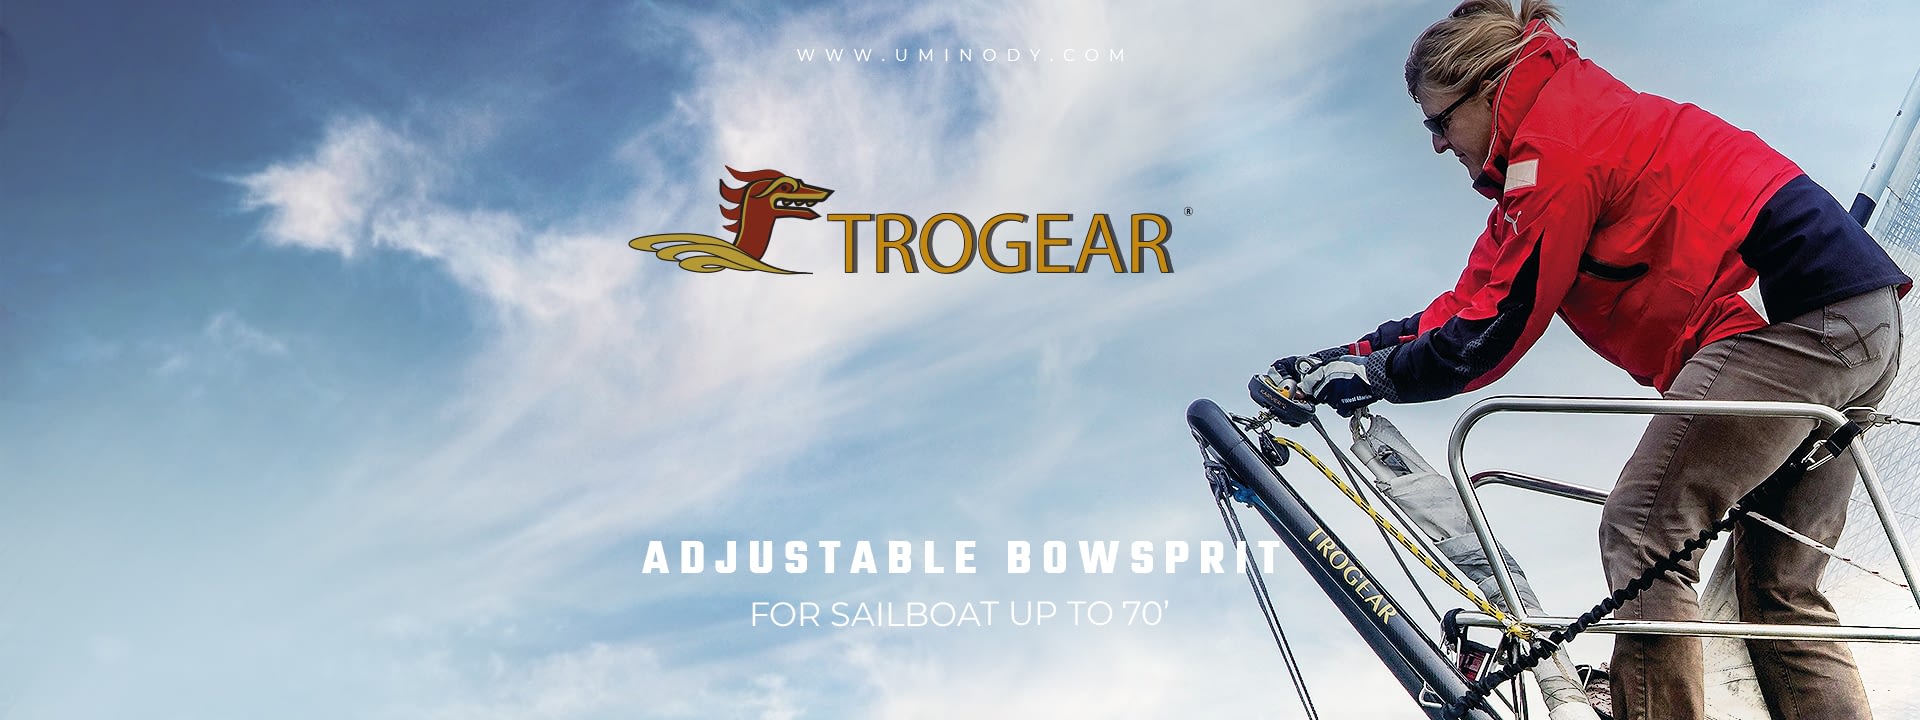 Trogear Adjustable Bowsprit for sailboats up to 70'